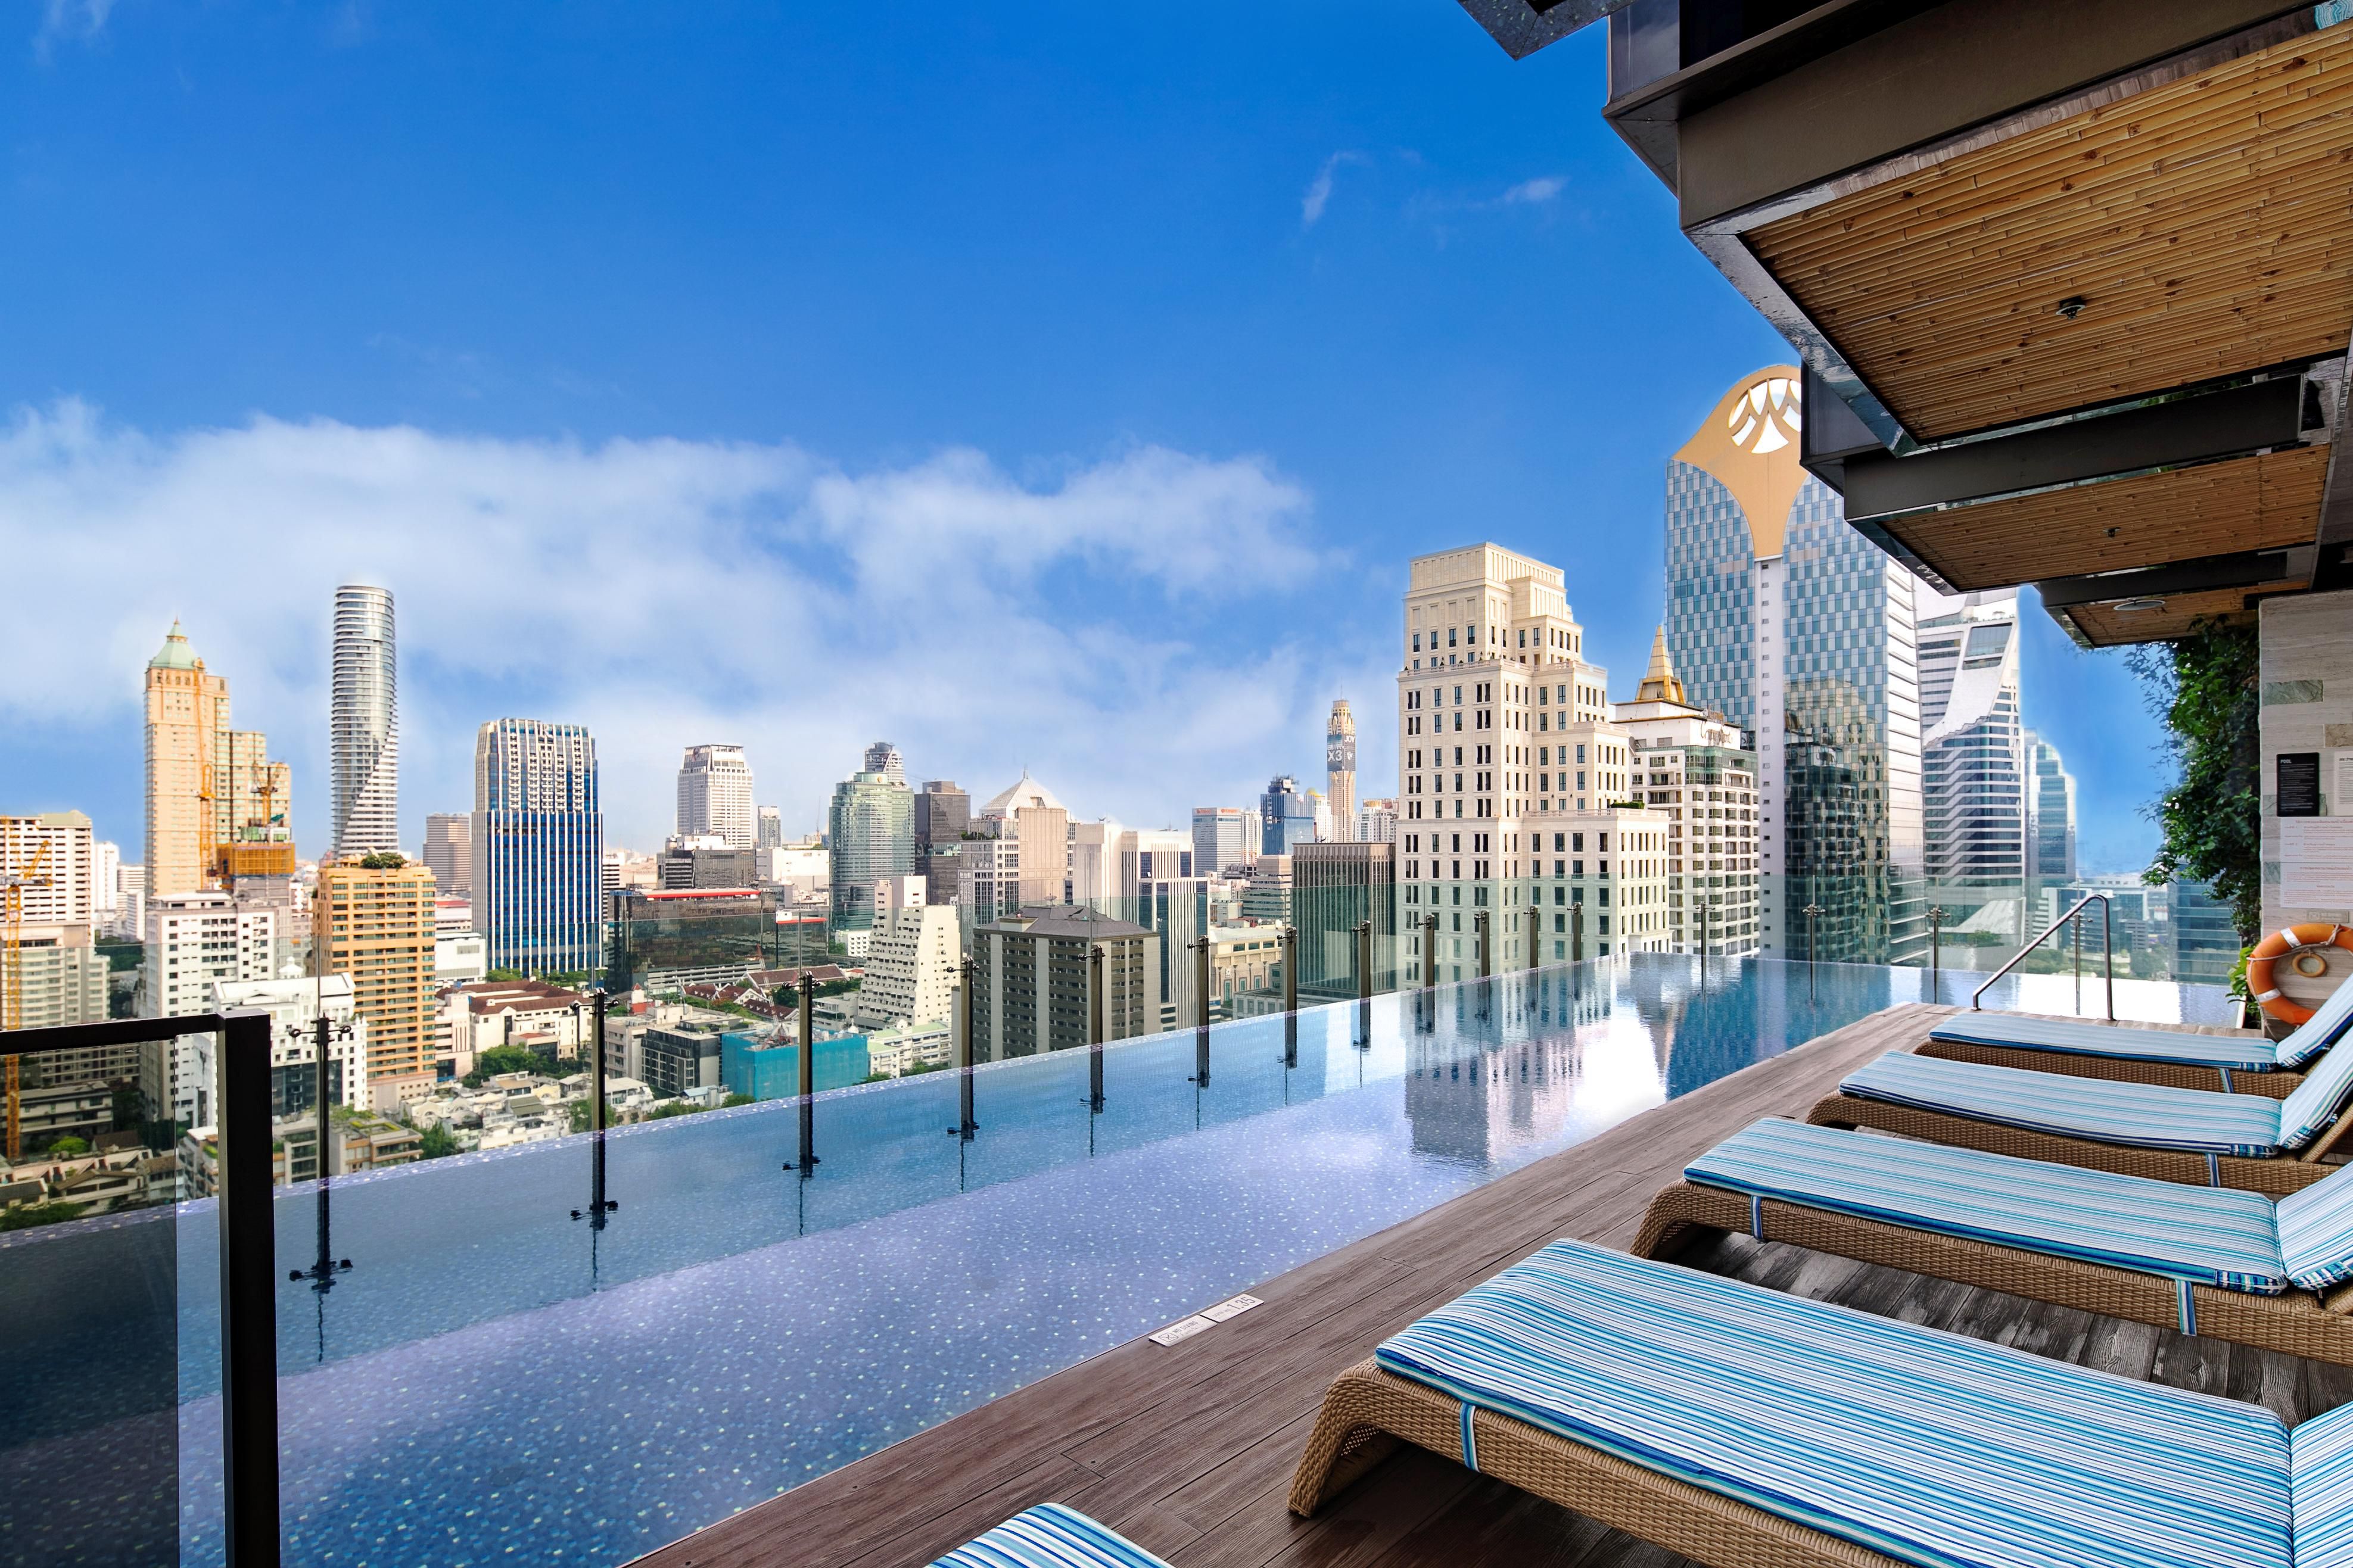 Retreat into a sanctuary away from the bustling city as we offer you a hideaway oasis at our rooftop infinity pool in Bangkok. Located on the 24th floor, unwind on our sun loungers and witness unrivalled views of Bangkok’s city skyline, while you refresh yourself with our cocktail menu and satisfy your appetite with poolside bites.